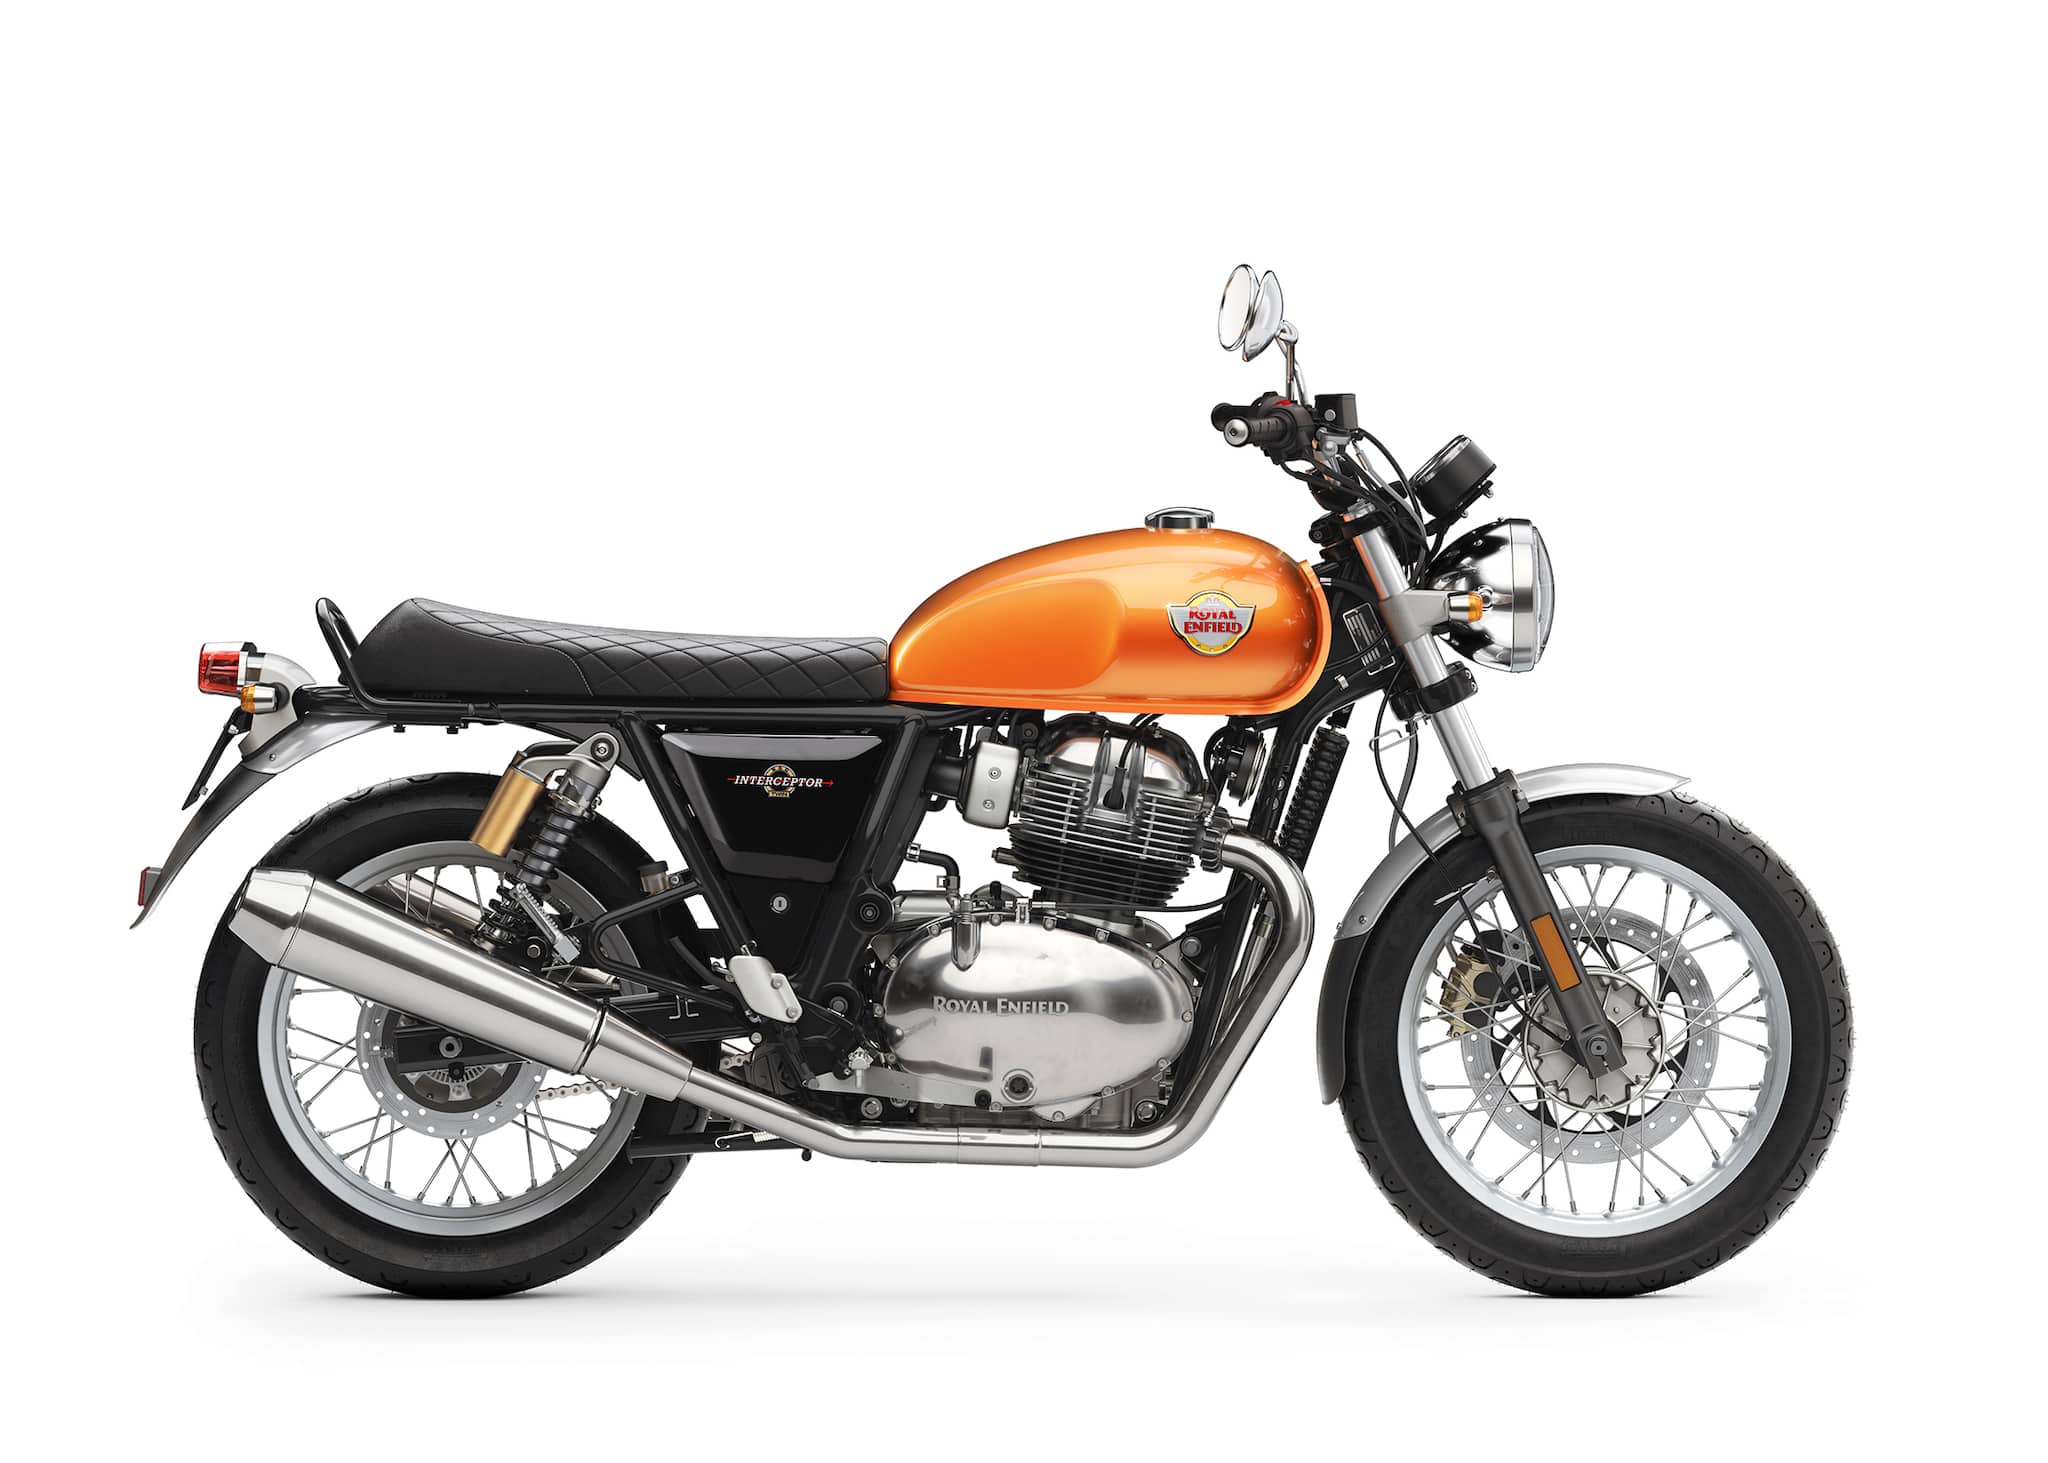 Royal Enfield Interceptor INT 650 The Interceptor is a roadster having an all-new, dedicated steel-tube cradle chassis. It has 18-inch front and rear Pirelli tyres and twin shock absorbers, along with front and rear disc brakes with ABS